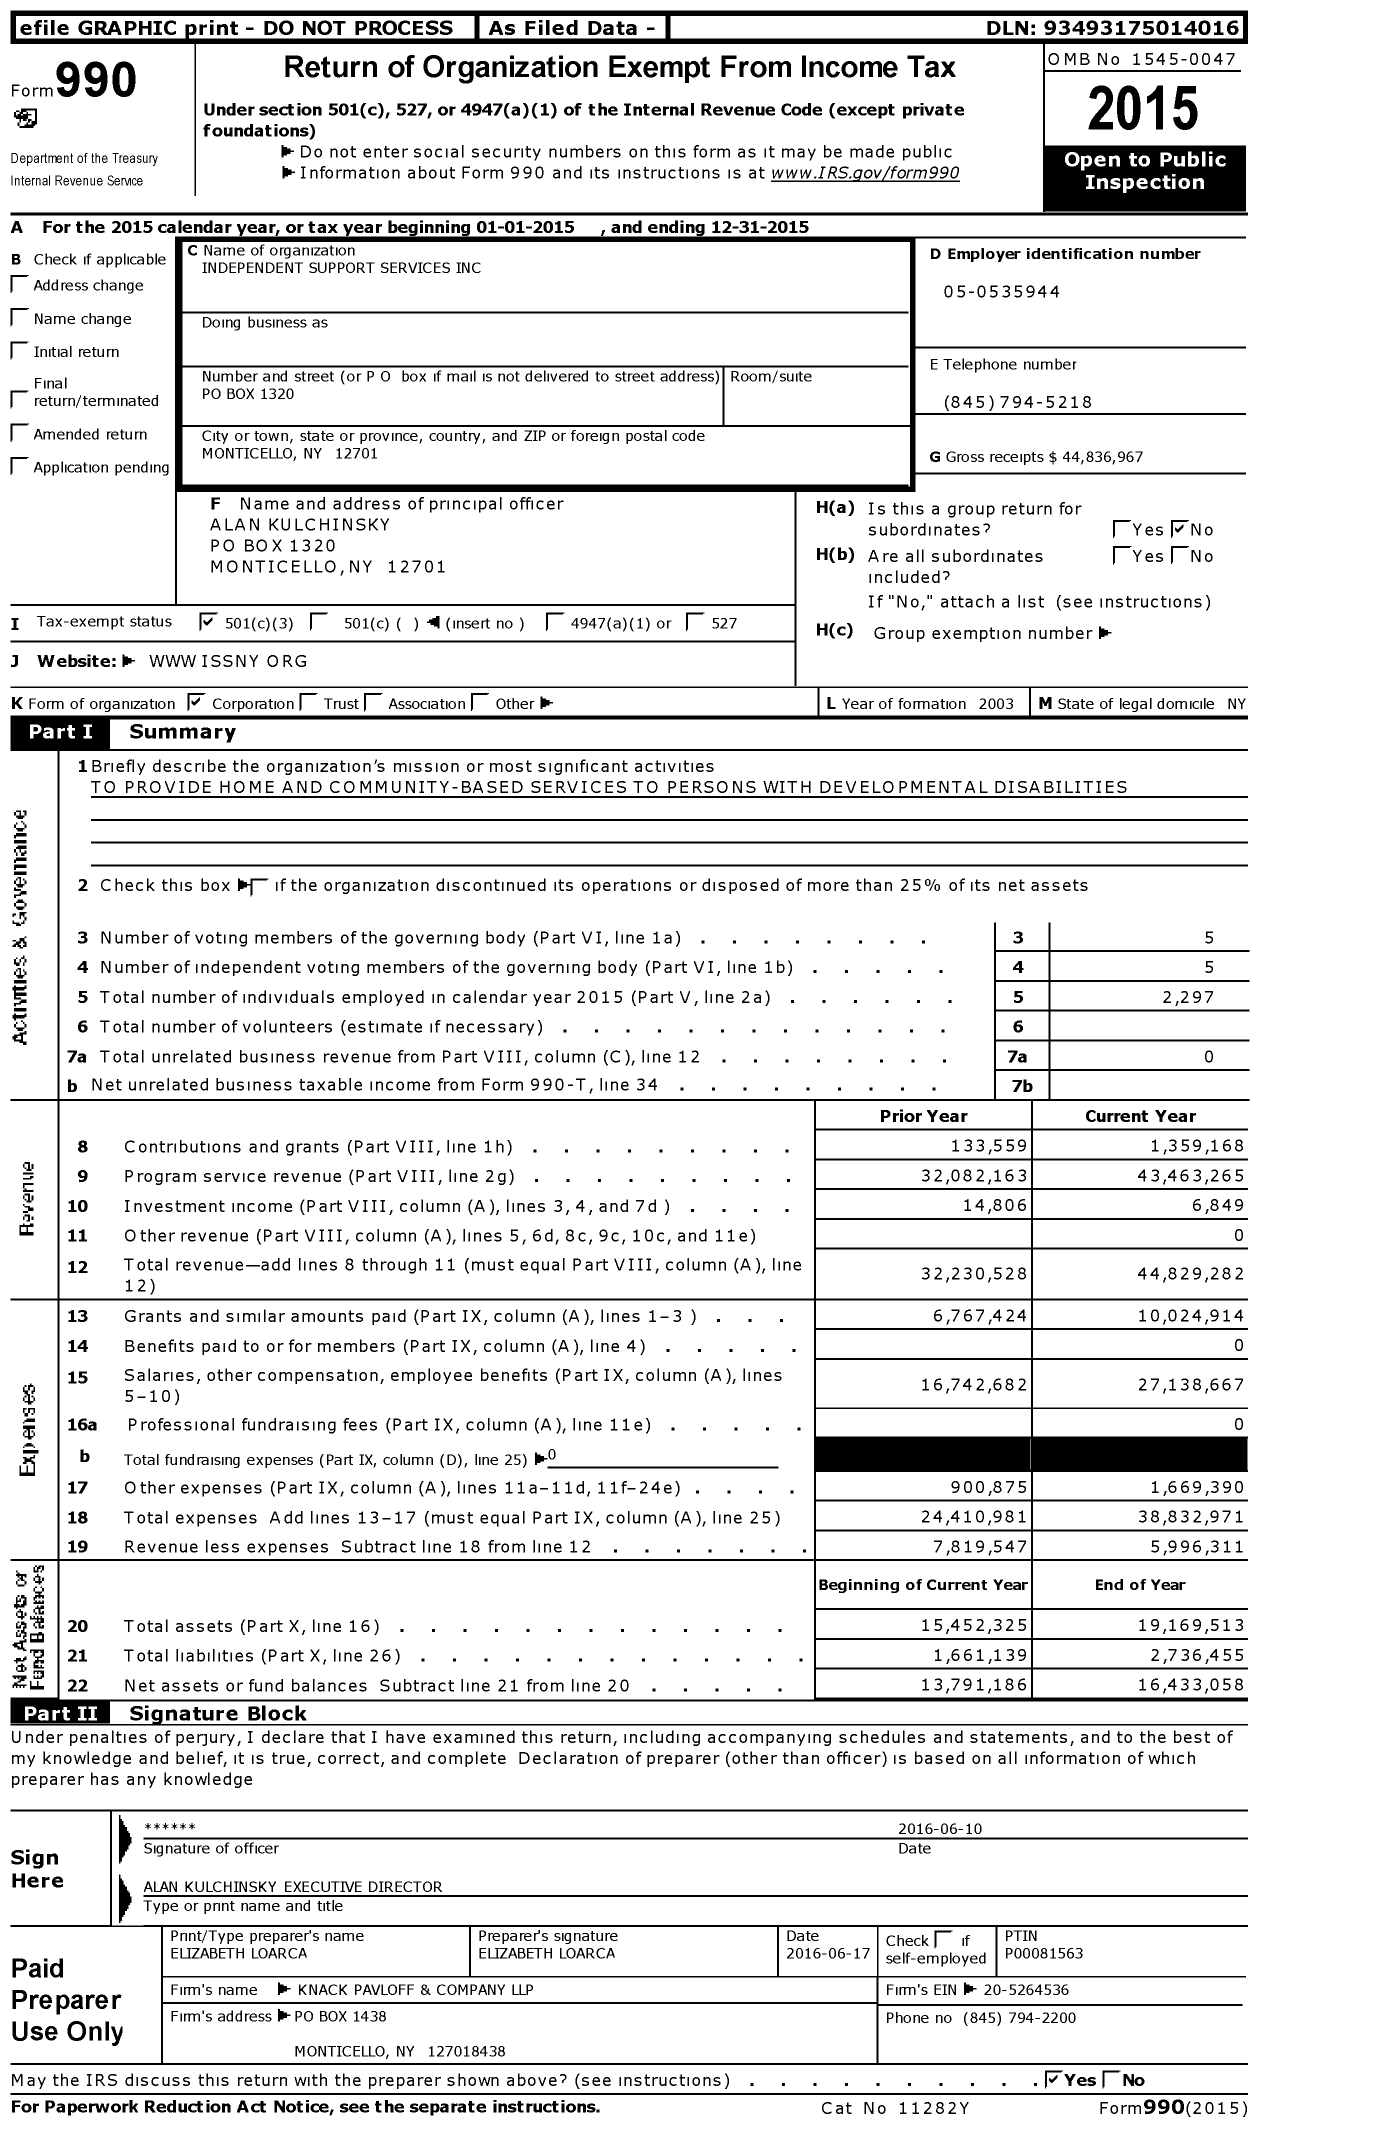 Image of first page of 2015 Form 990 for Independent Support Services